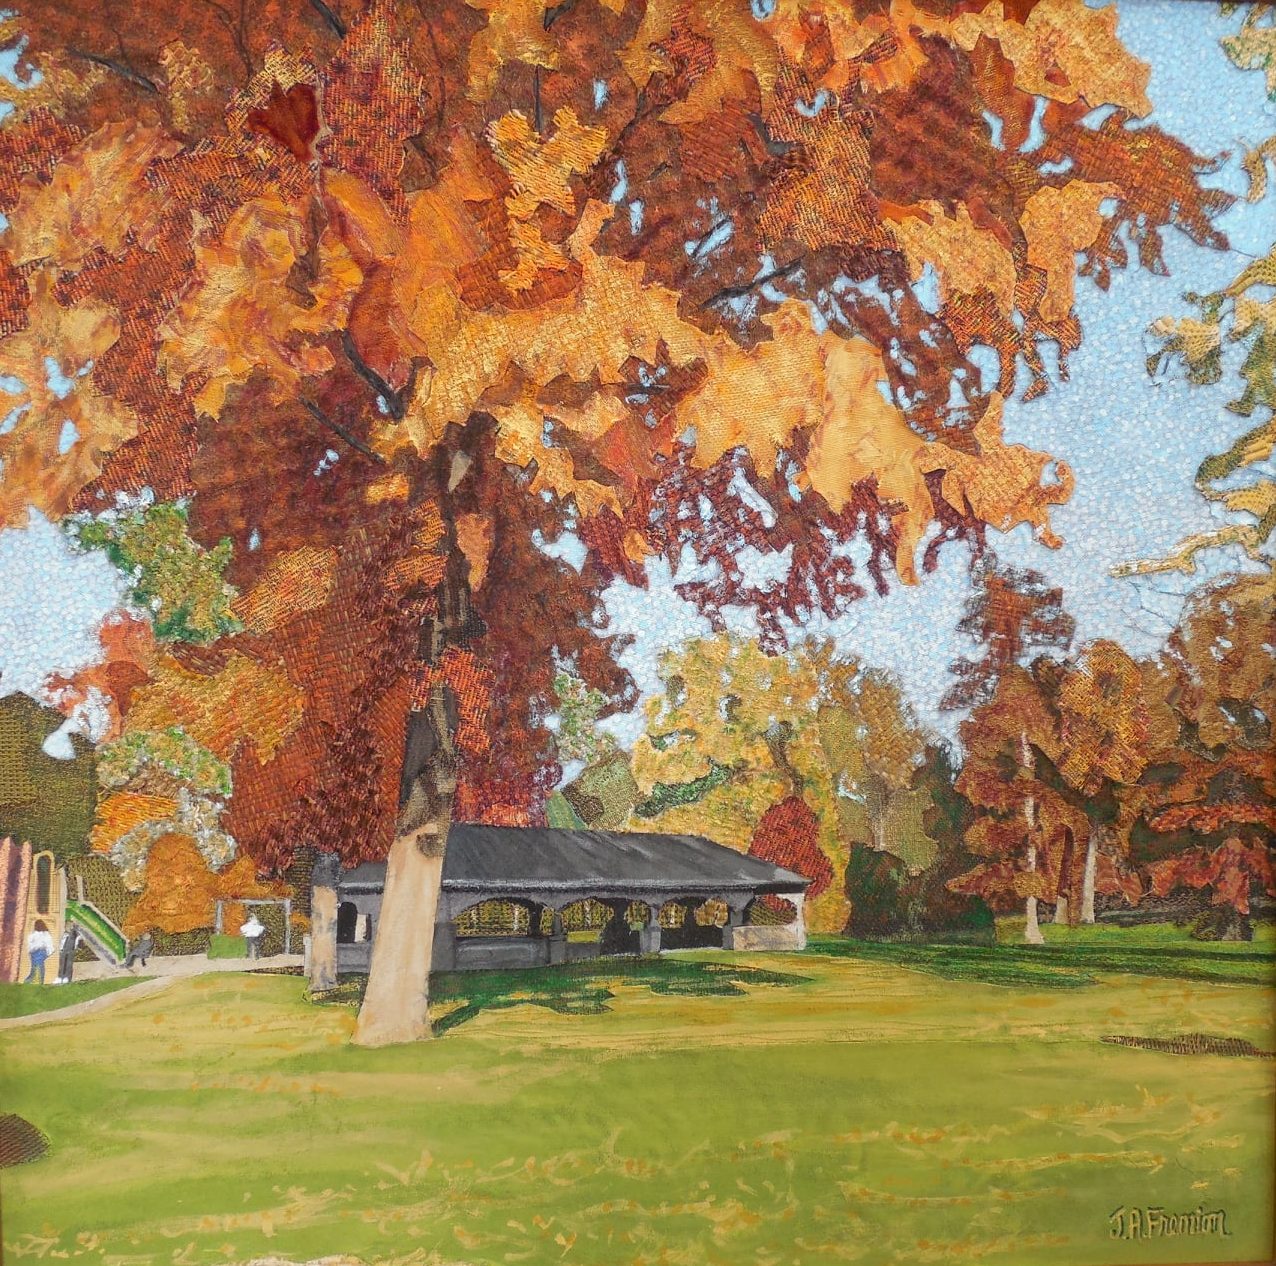 Fabric painting with fall trees and pavilion